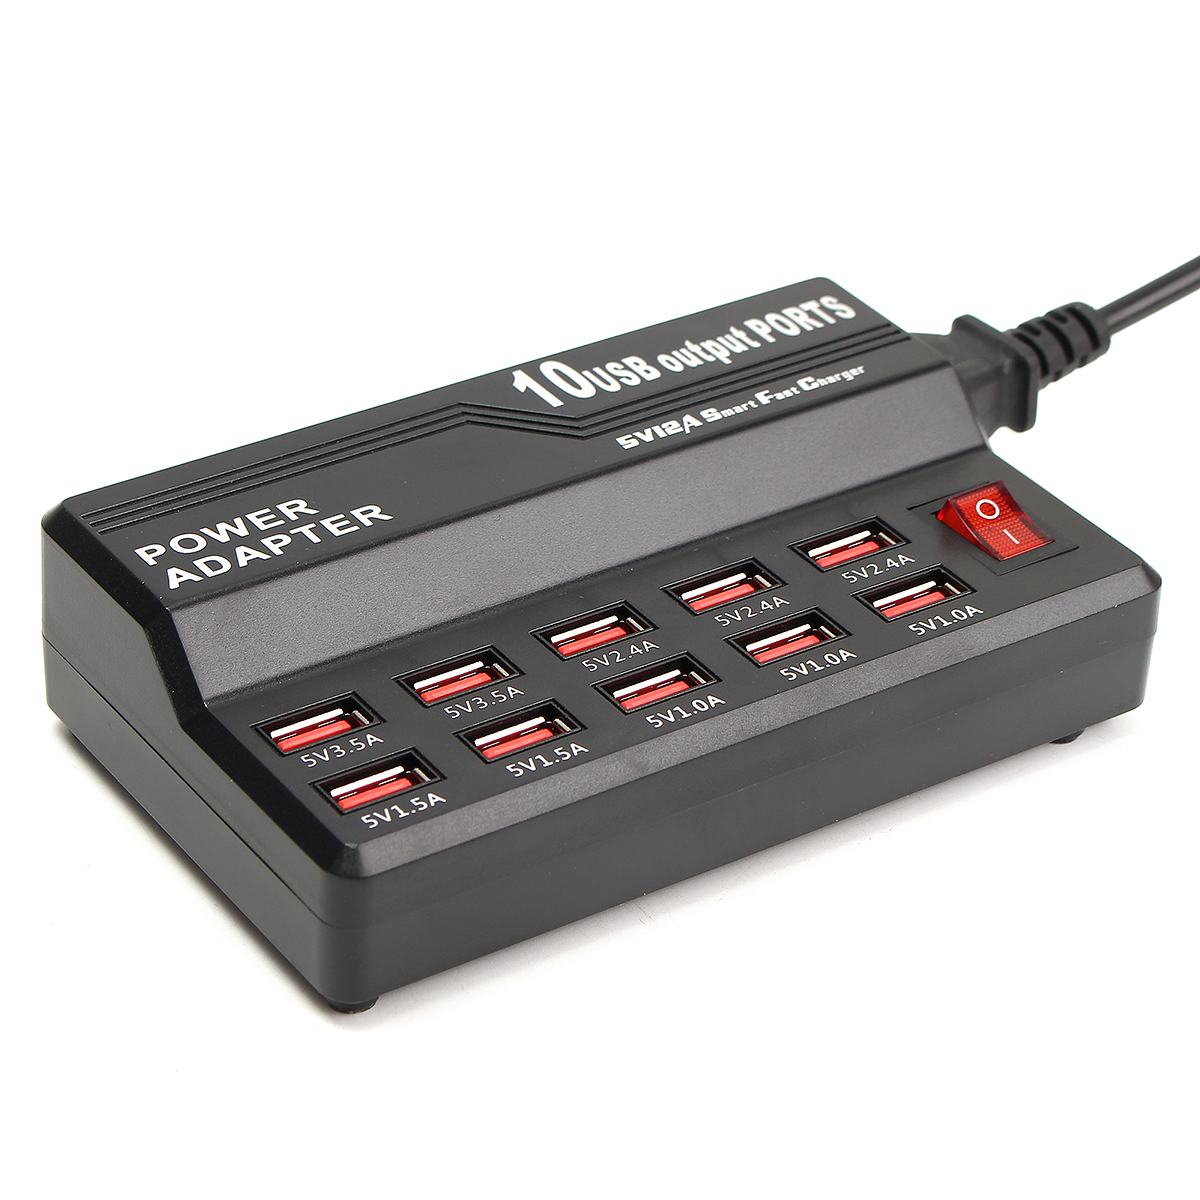 10-USB-20-Ports-5V-12A-Charging-Station-Universal-Charger-Power-Adapter-1133207